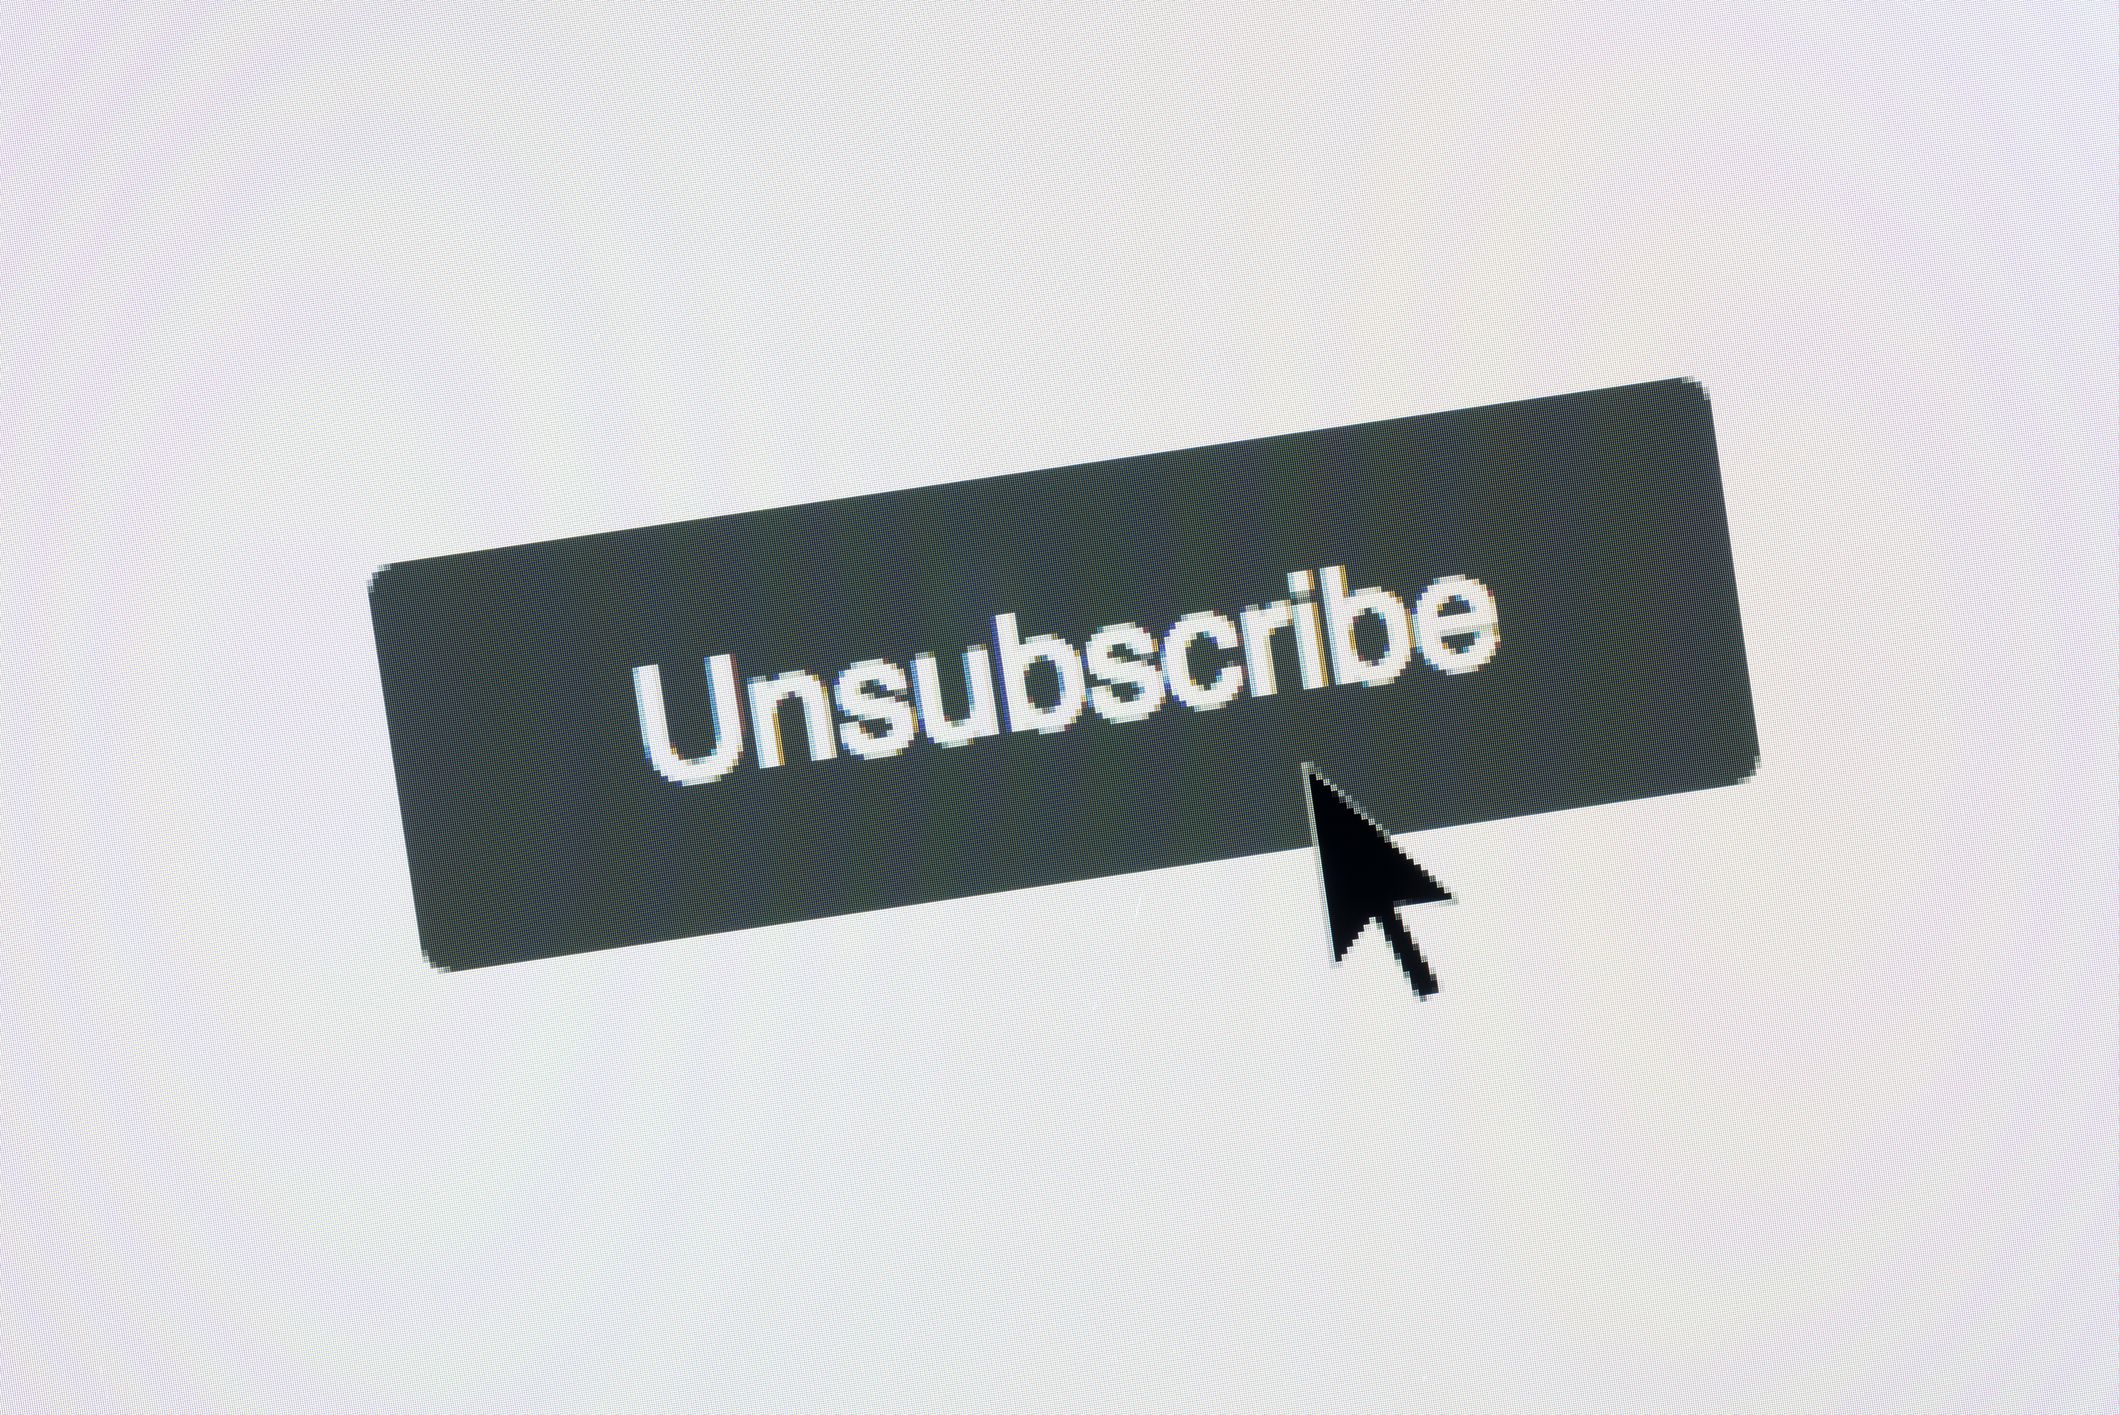 Can you unsubscribe to only fans